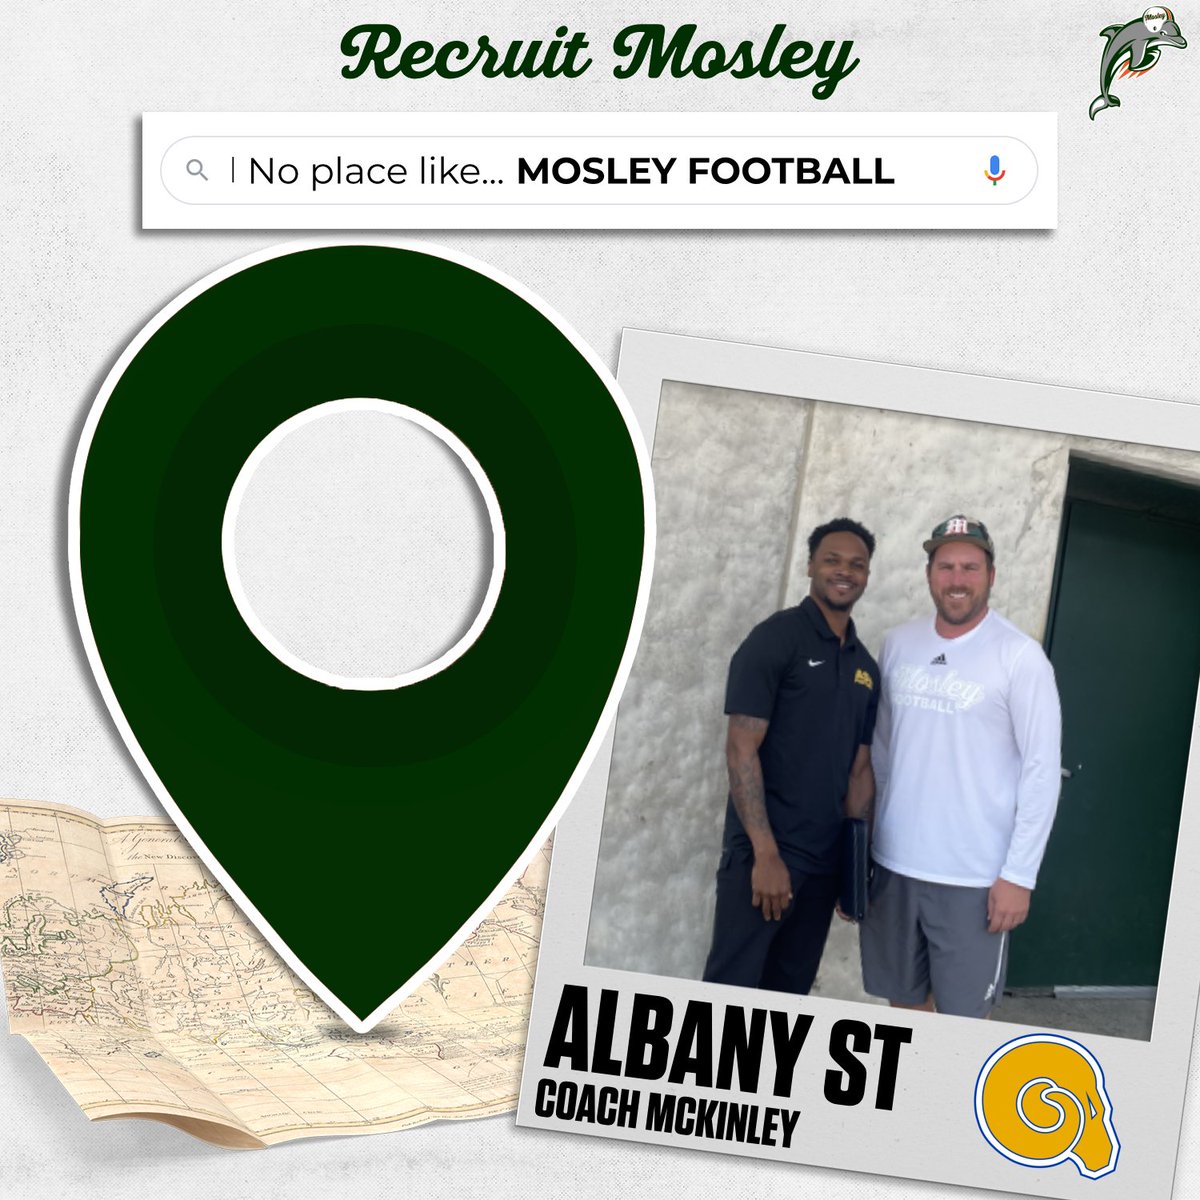 Thank you to @CoachOMcKinley from @ASUGoldenRamsFB for stopping by to see our players at Mosley Football #MosleyMade